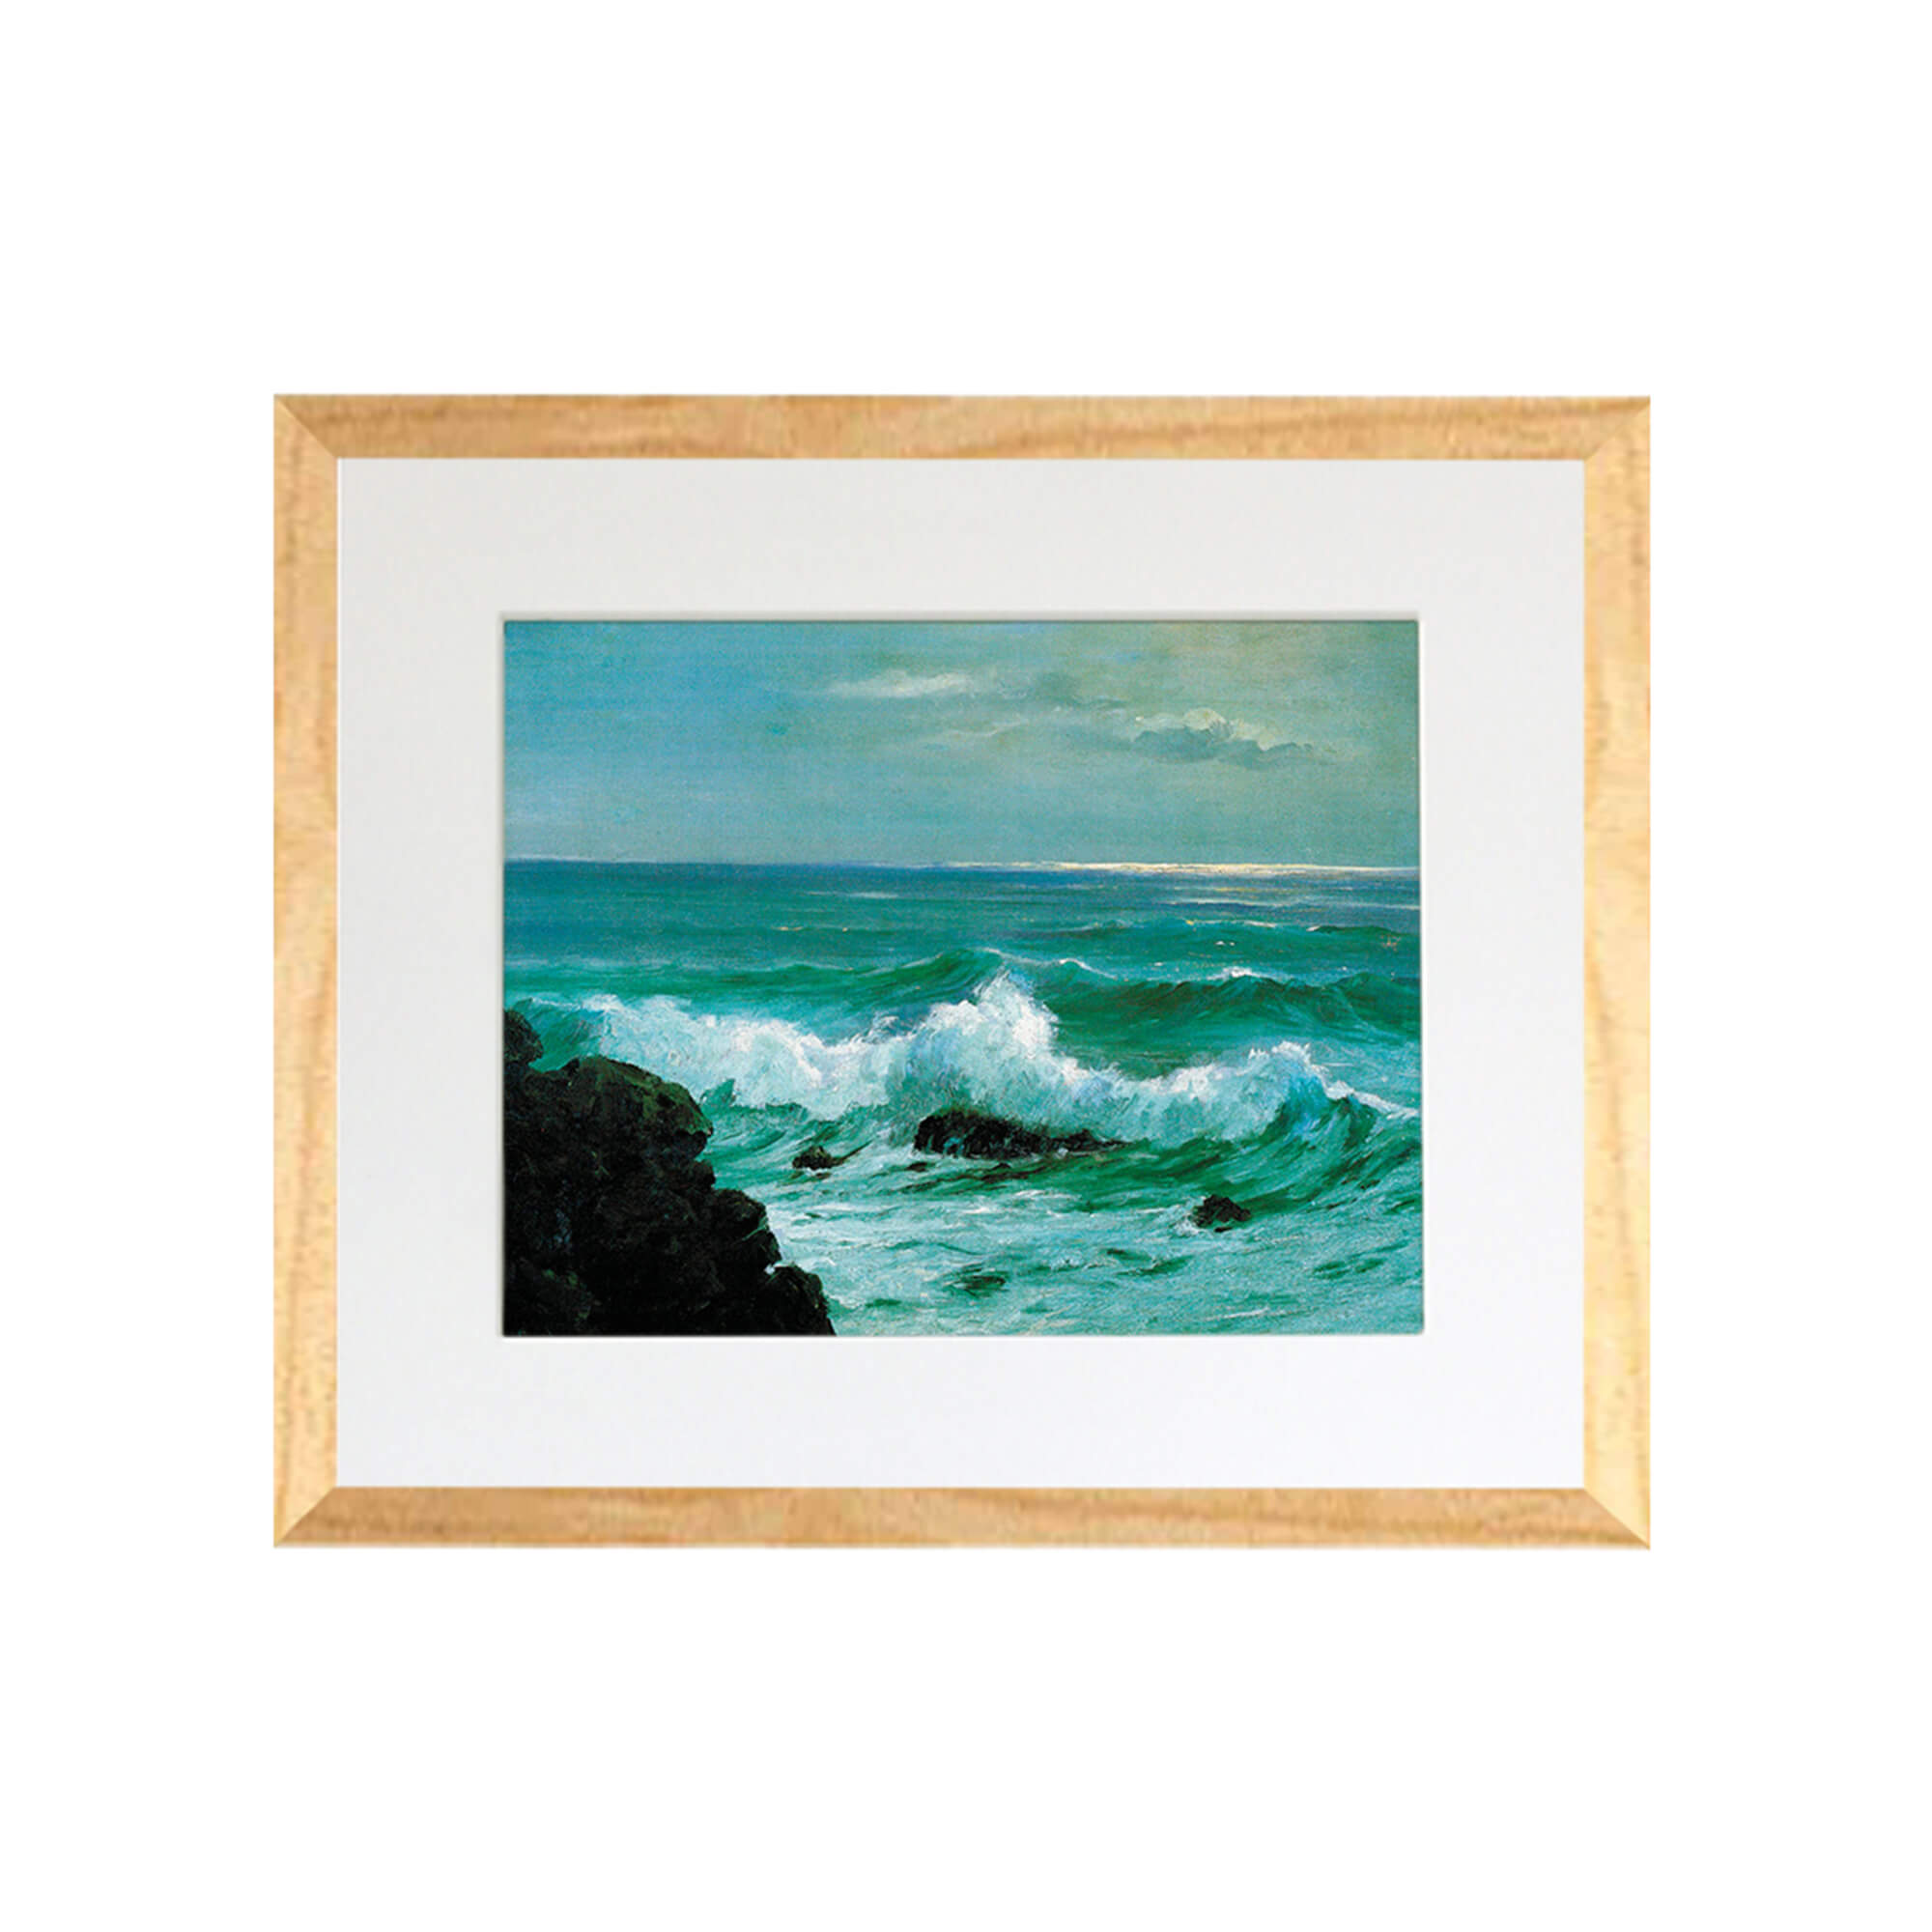 Vintage painting of a teal seascape with large crashing waves